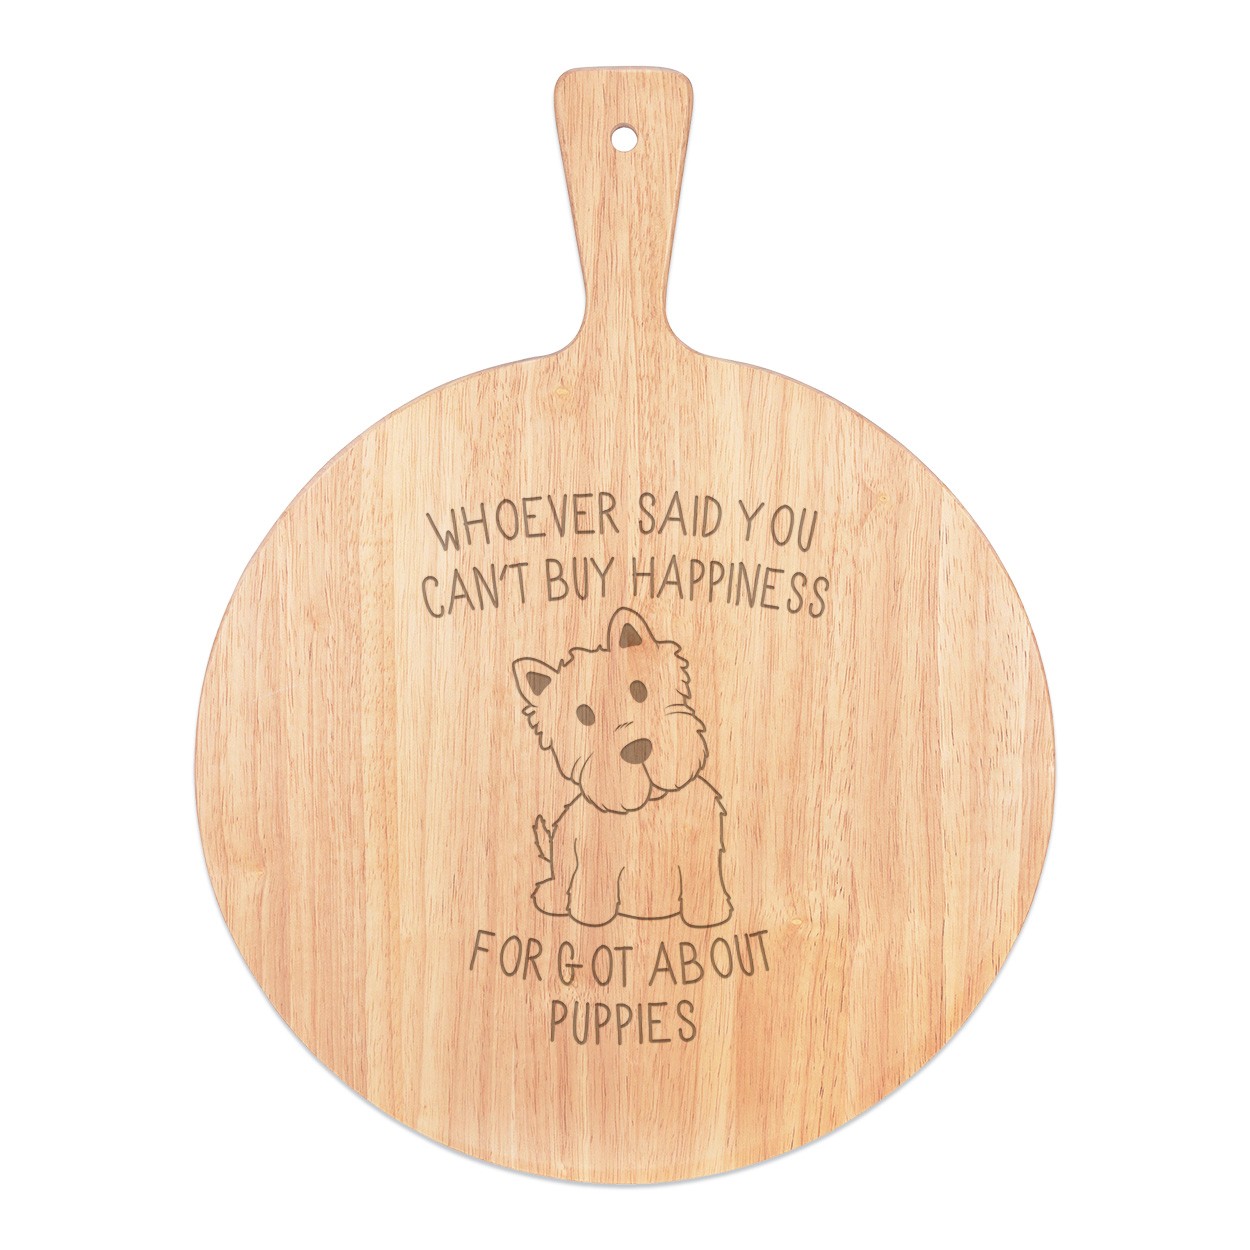 Whoever Said You Can't Buy Happiness Forgot About Puppies Pizza Board Paddle Serving Tray Handle Round Wooden 45x34cm